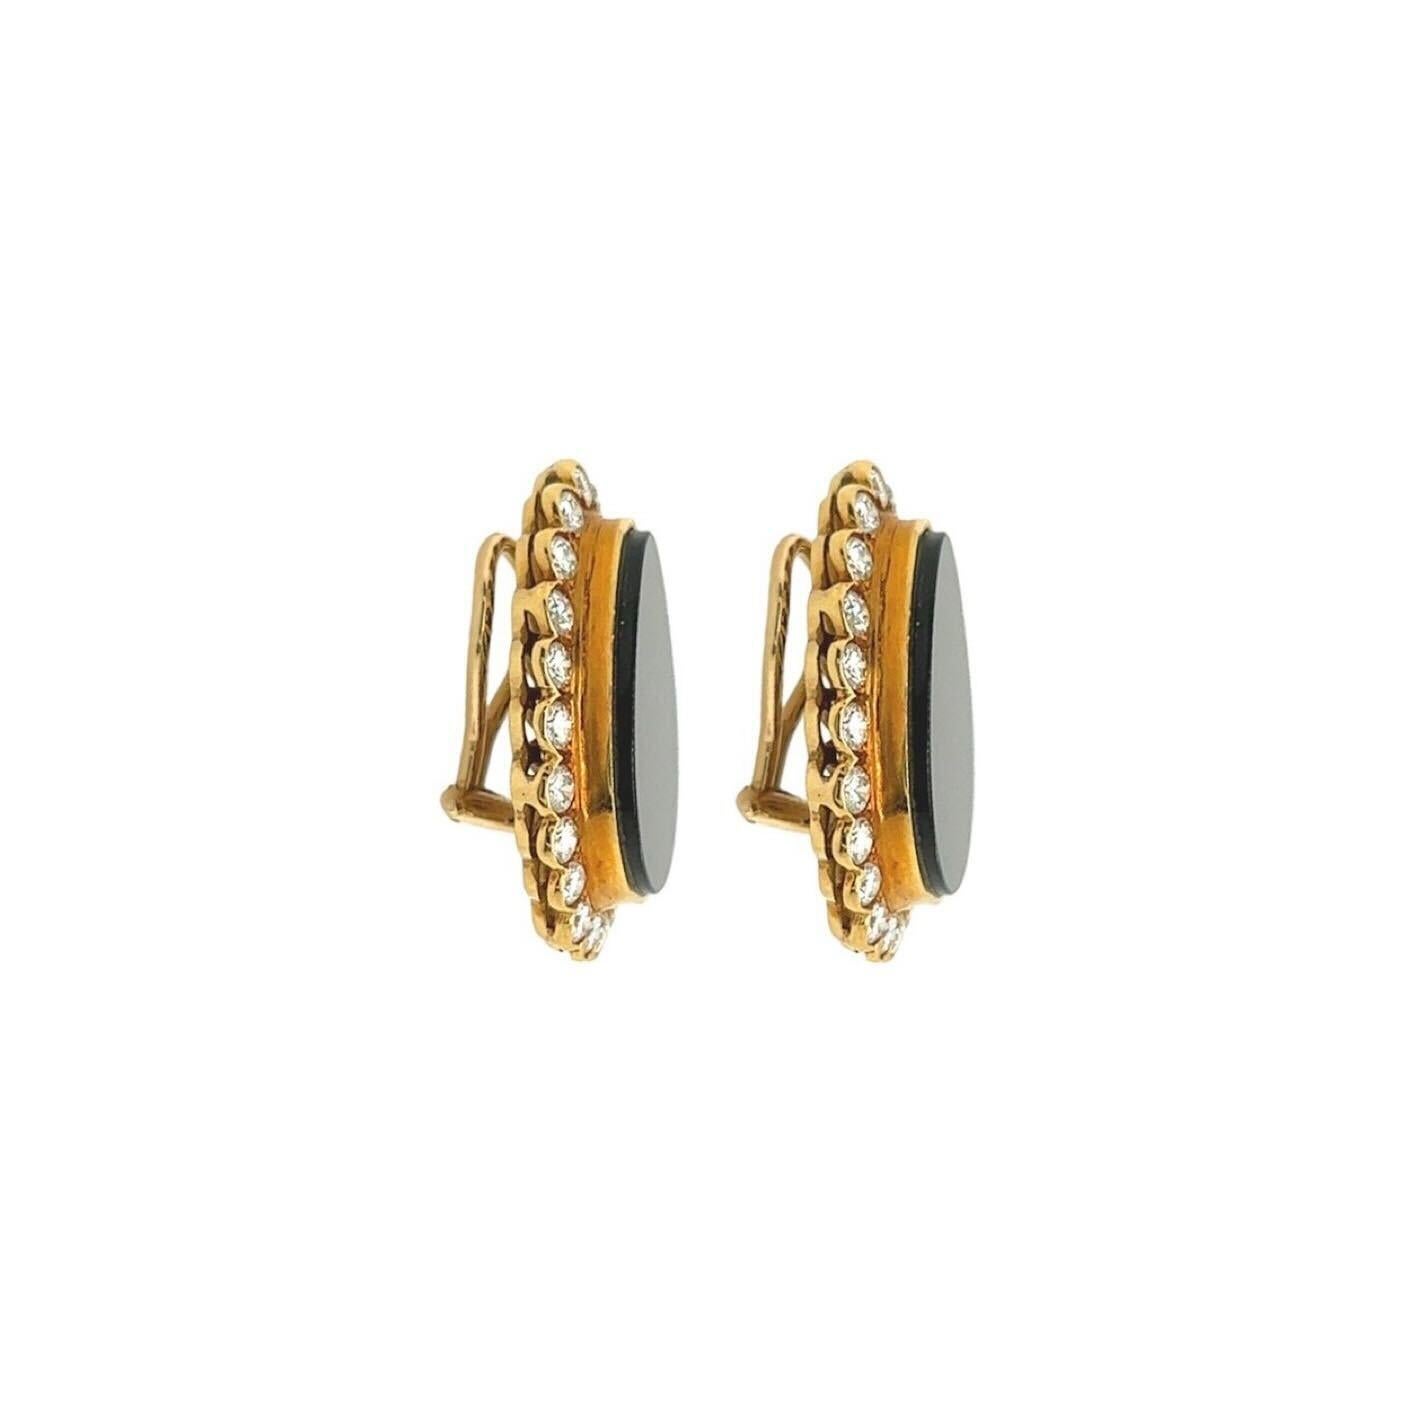 A pair of 18 karat yellow gold, black onyx and diamond earclips.  Each earclip designed as bezel set drop shaped black onyx plaque surrounded by twenty two (22) bezel set round brilliant cut diamonds.  Total diamond weight approximately 3.03 carats.